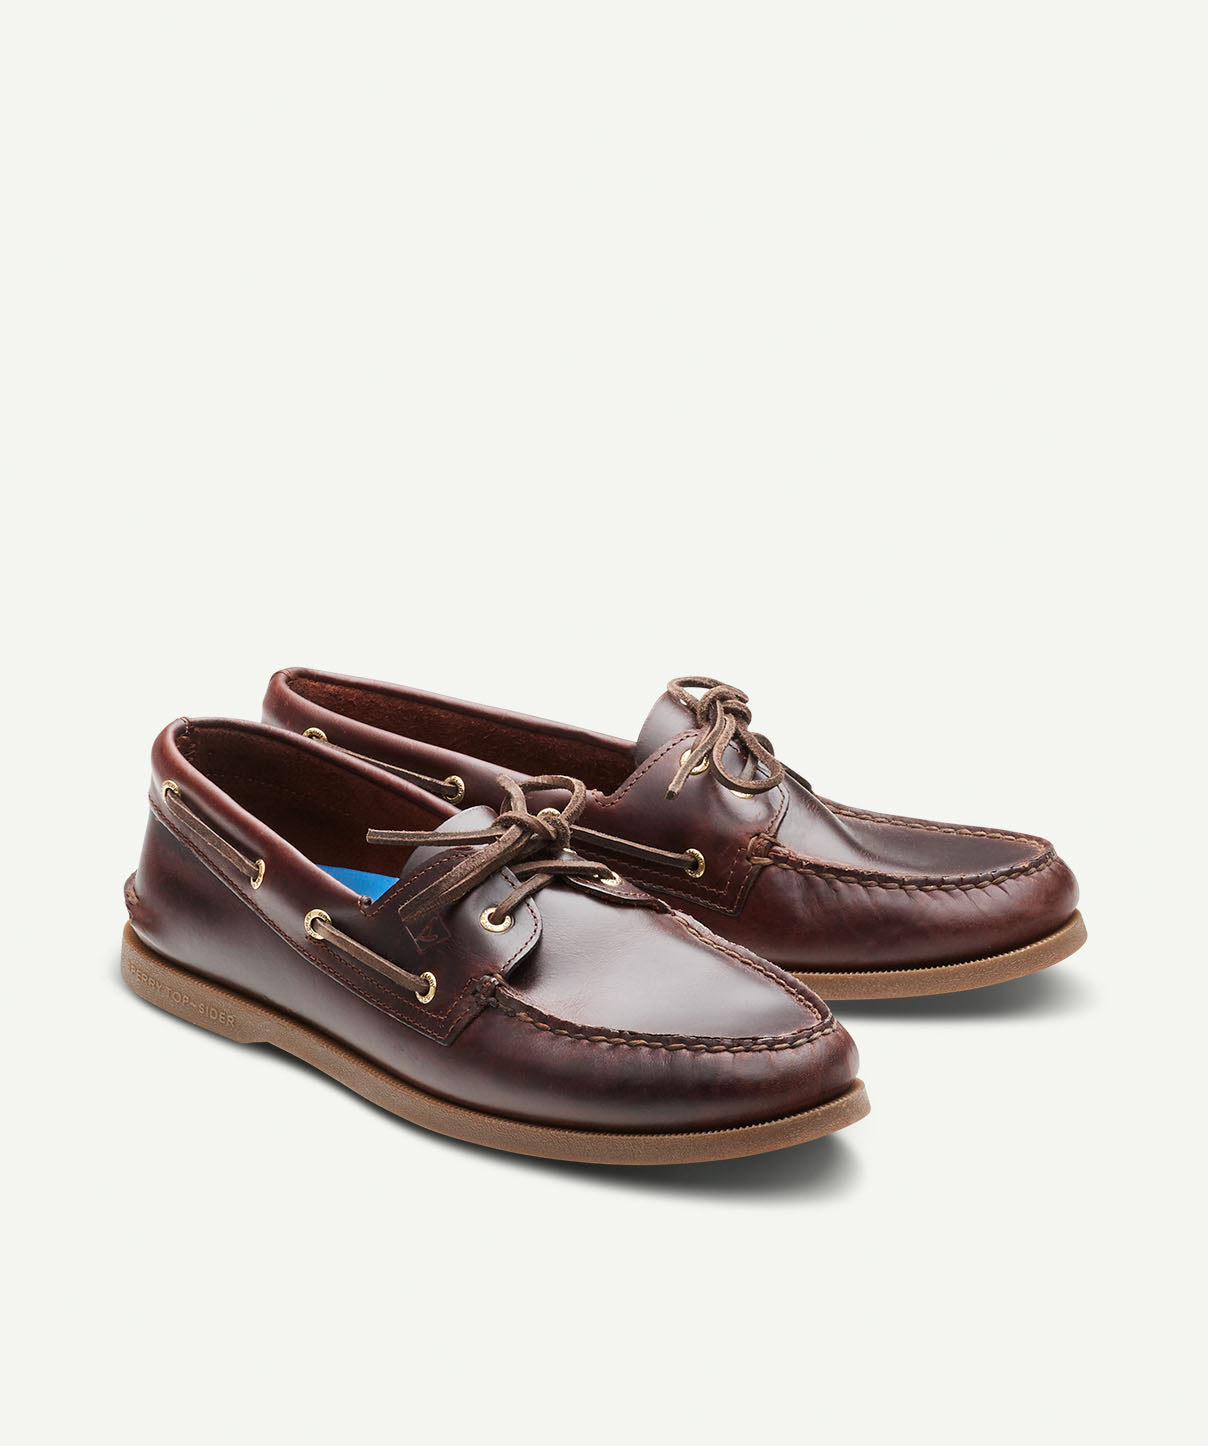 sperry top sider shoe